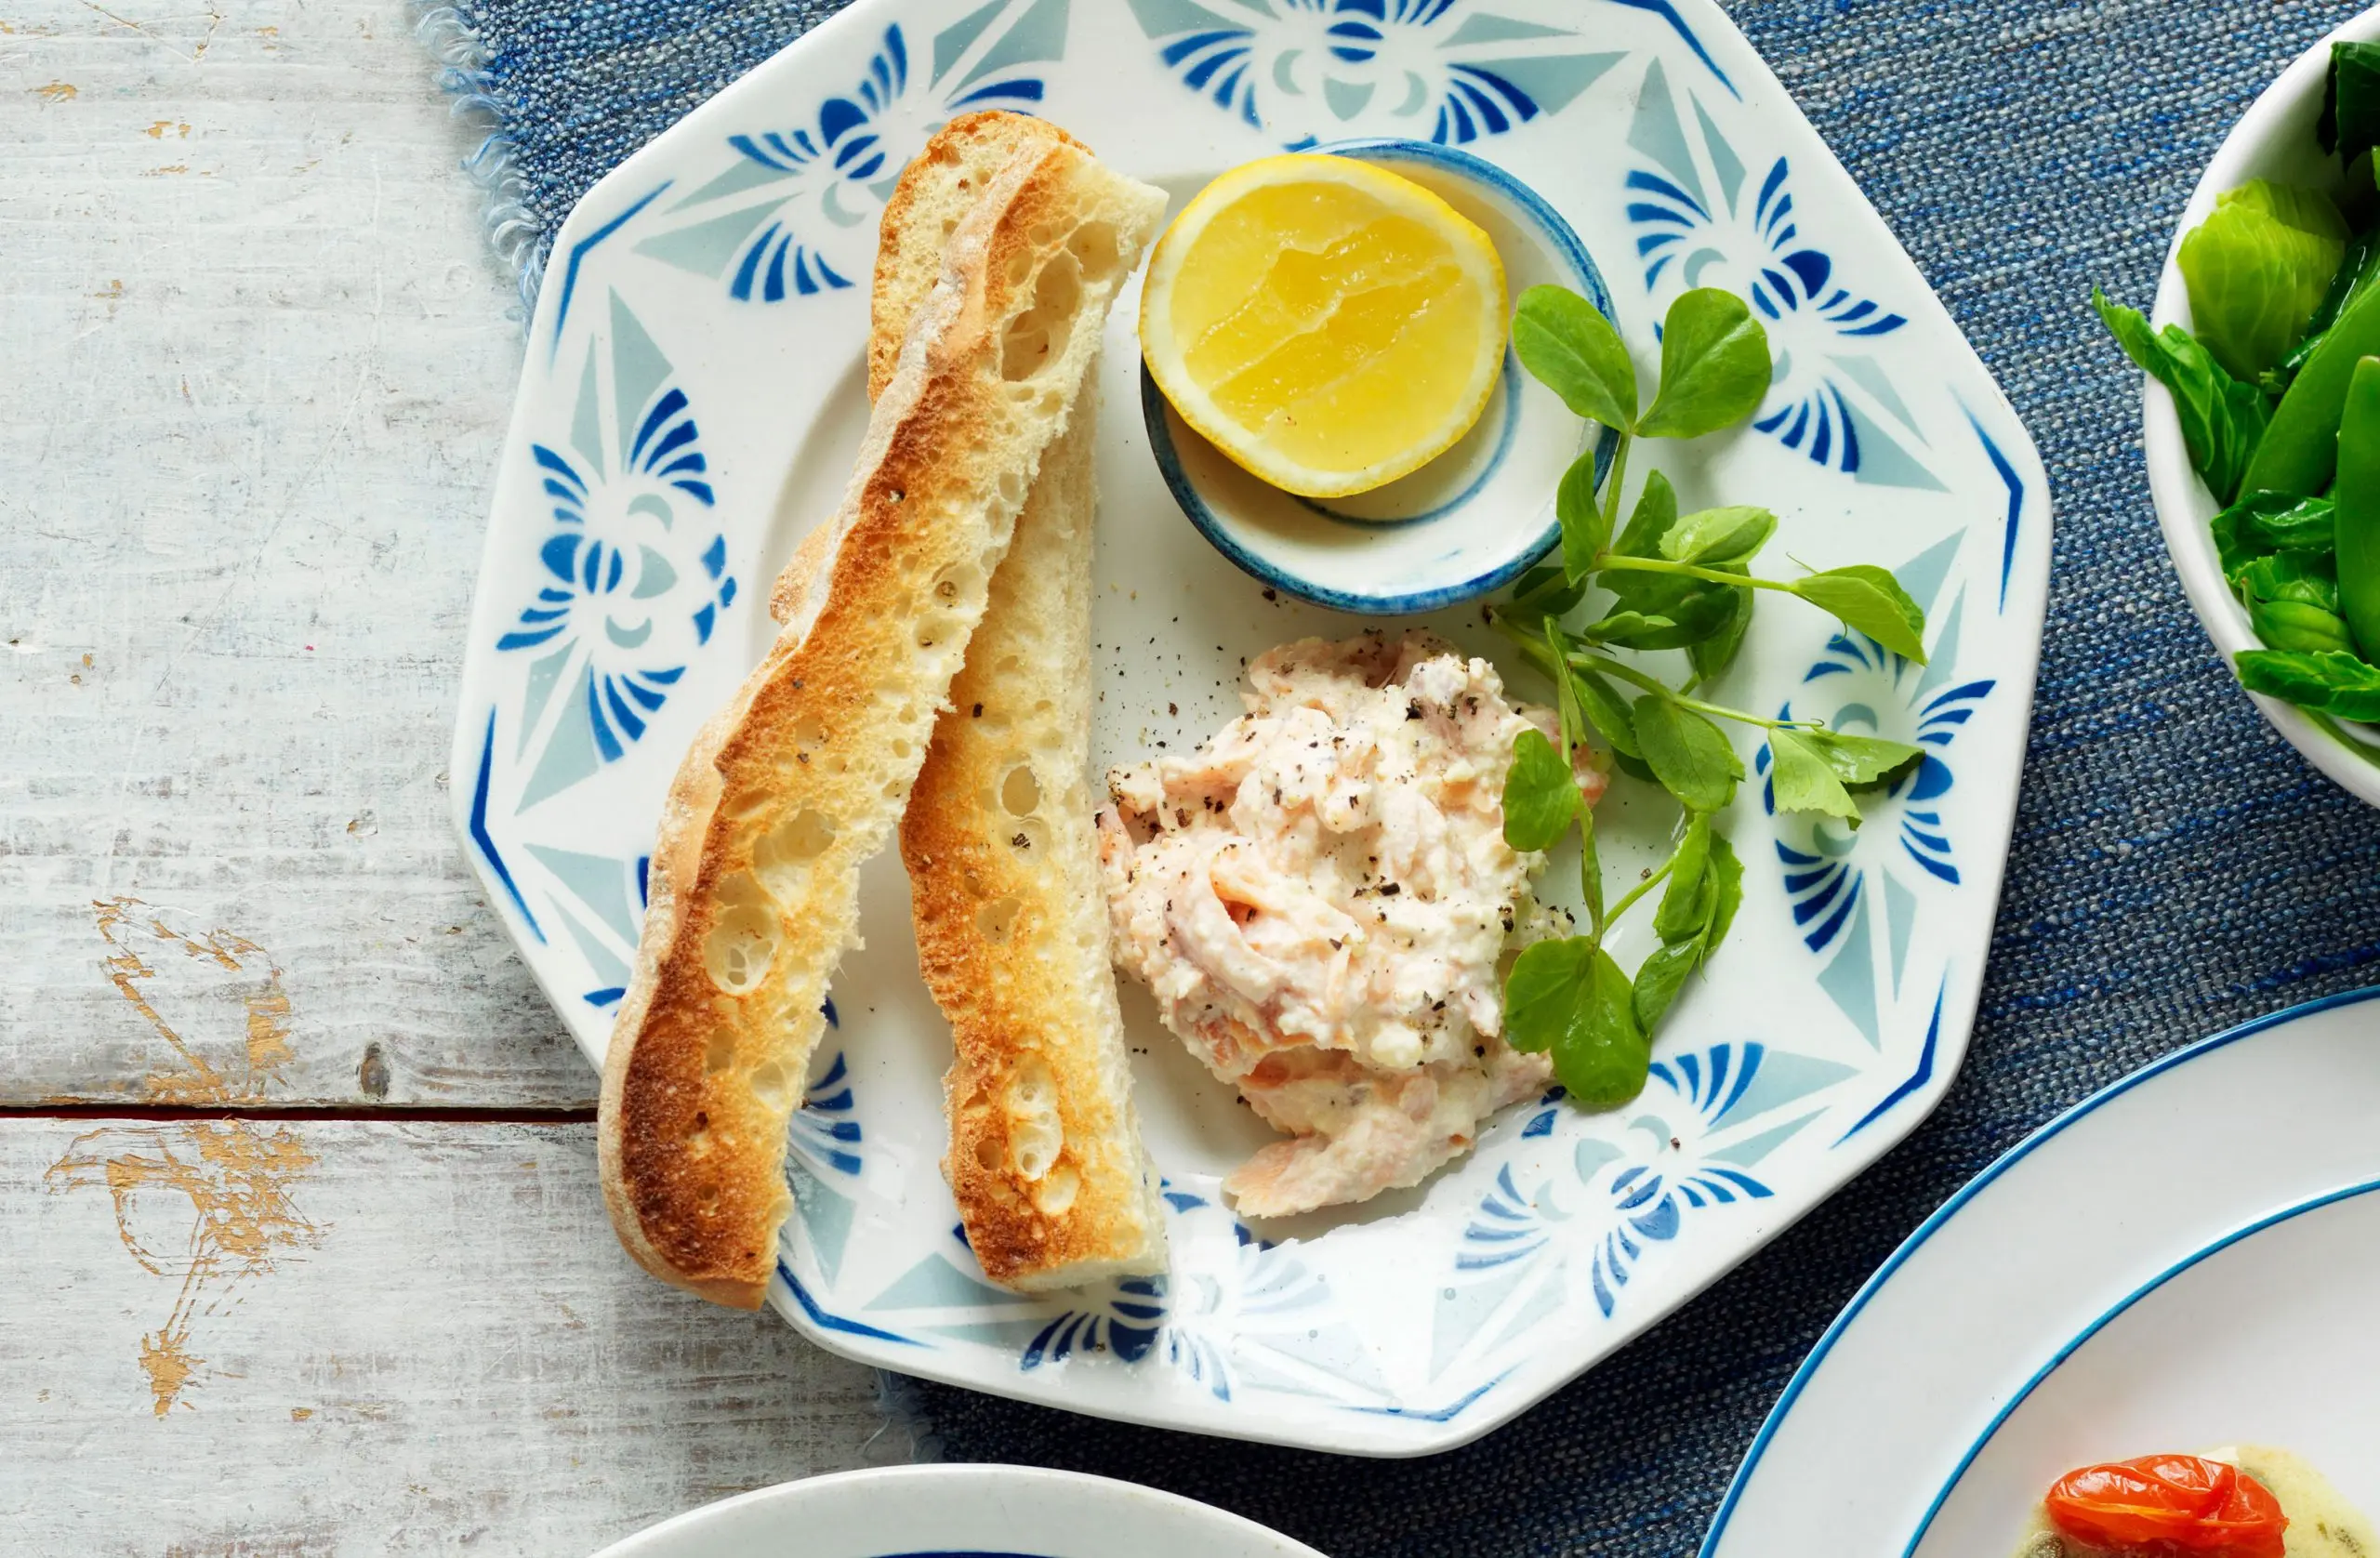 trout pâté recipe not smoked - What do you soak trout in before cooking